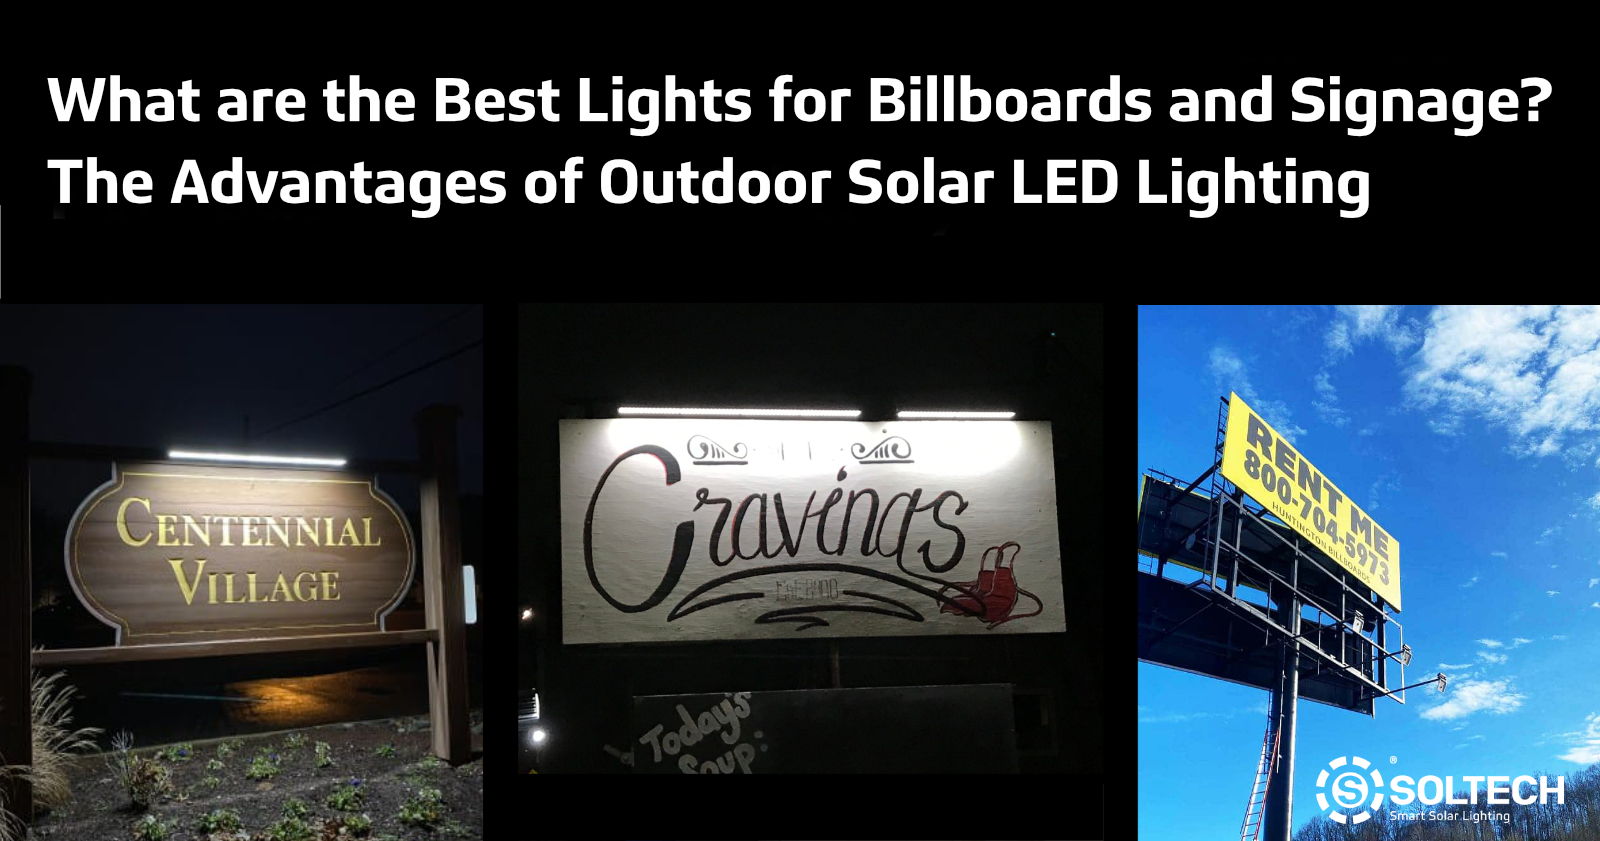 A composite image showing examples of solar billboard lights.